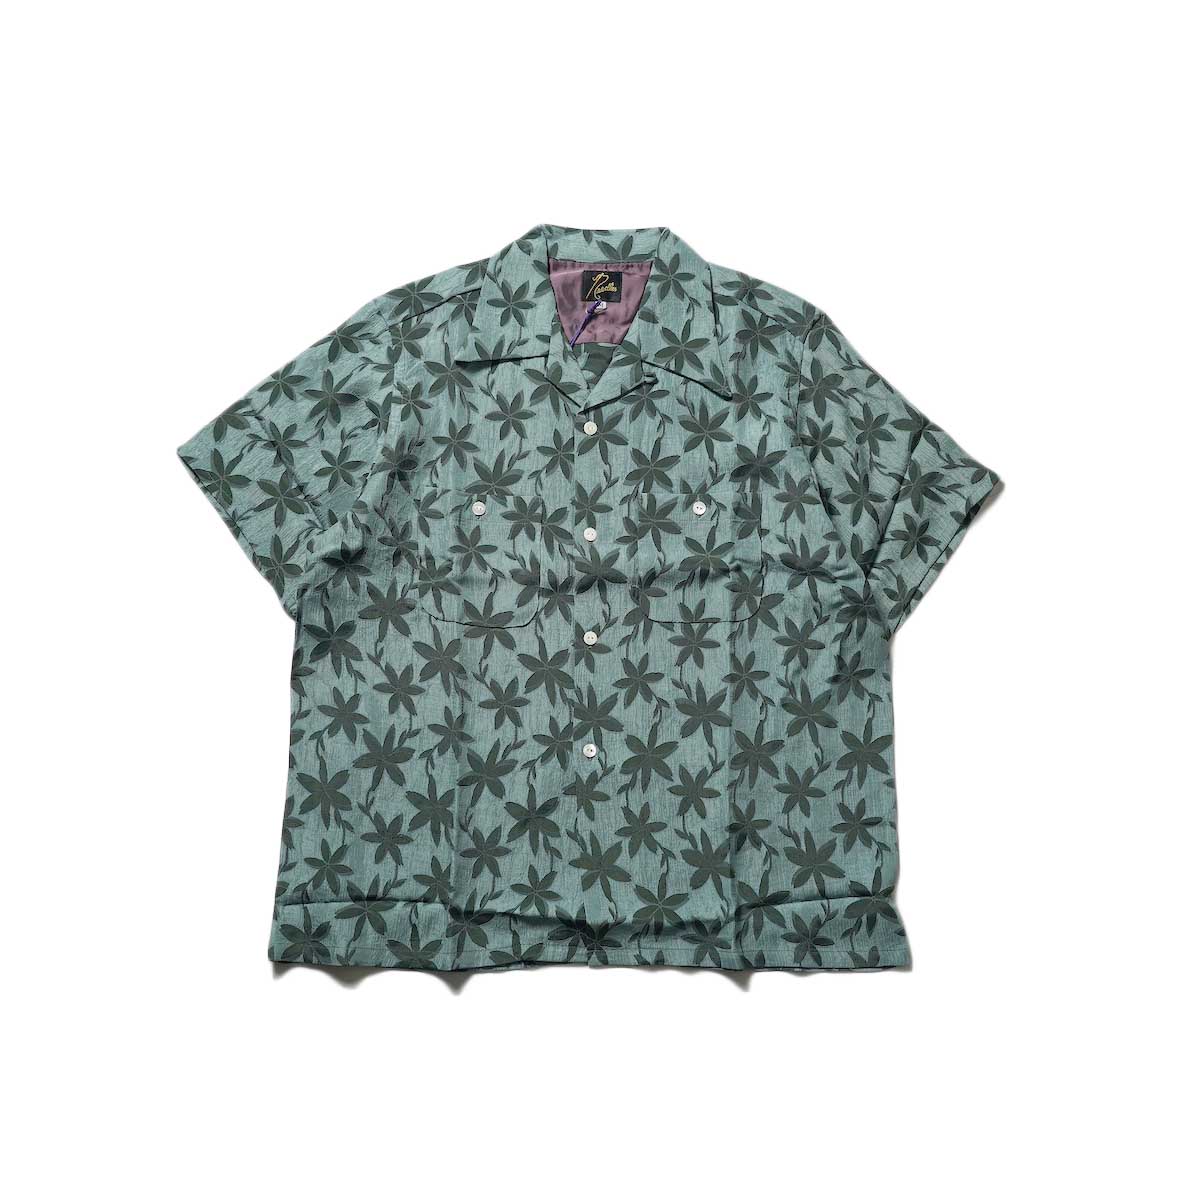 Needles / S/S One-Up Shirt - ACE/R Floral Jq (Green)